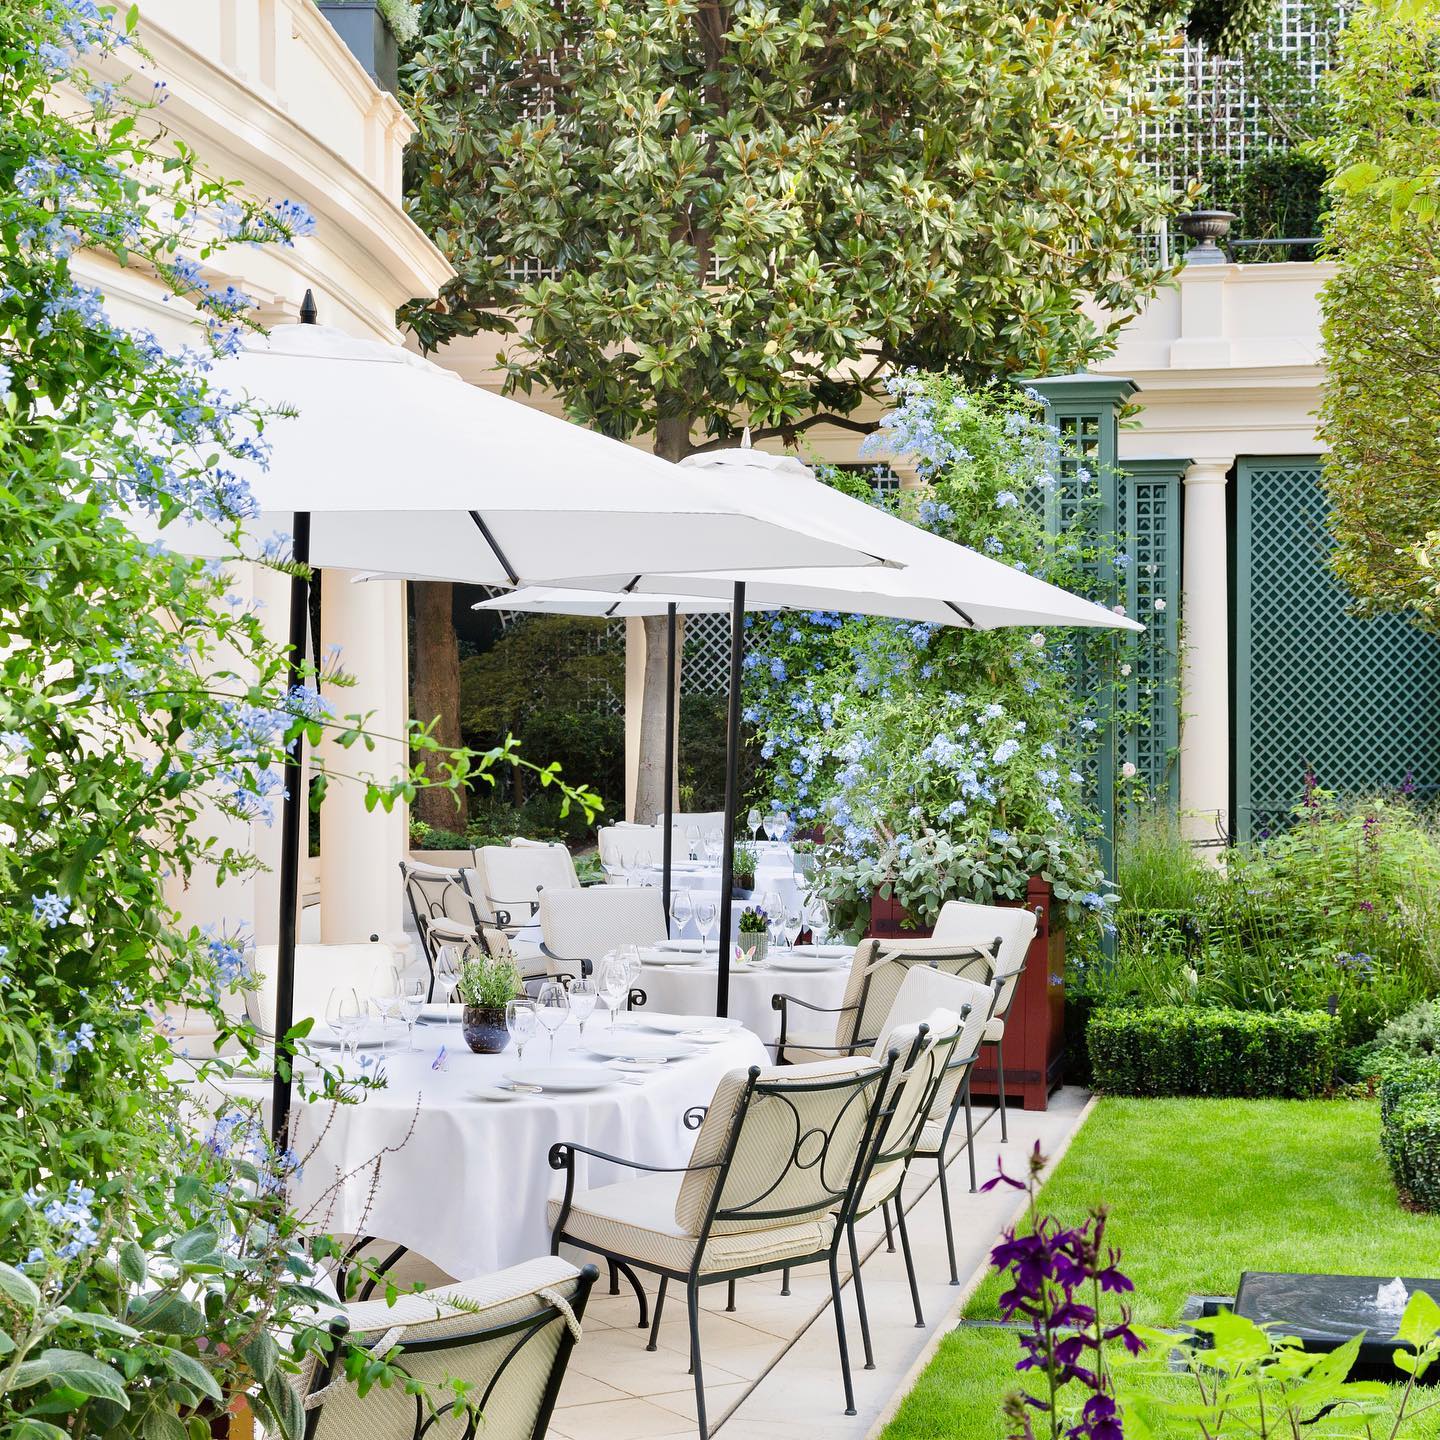 The garden courtyard restaurant of Le Bristol Paris with white linens, iron garden chairs with plump cream cushions and white parasols amidst the flowering blue planters